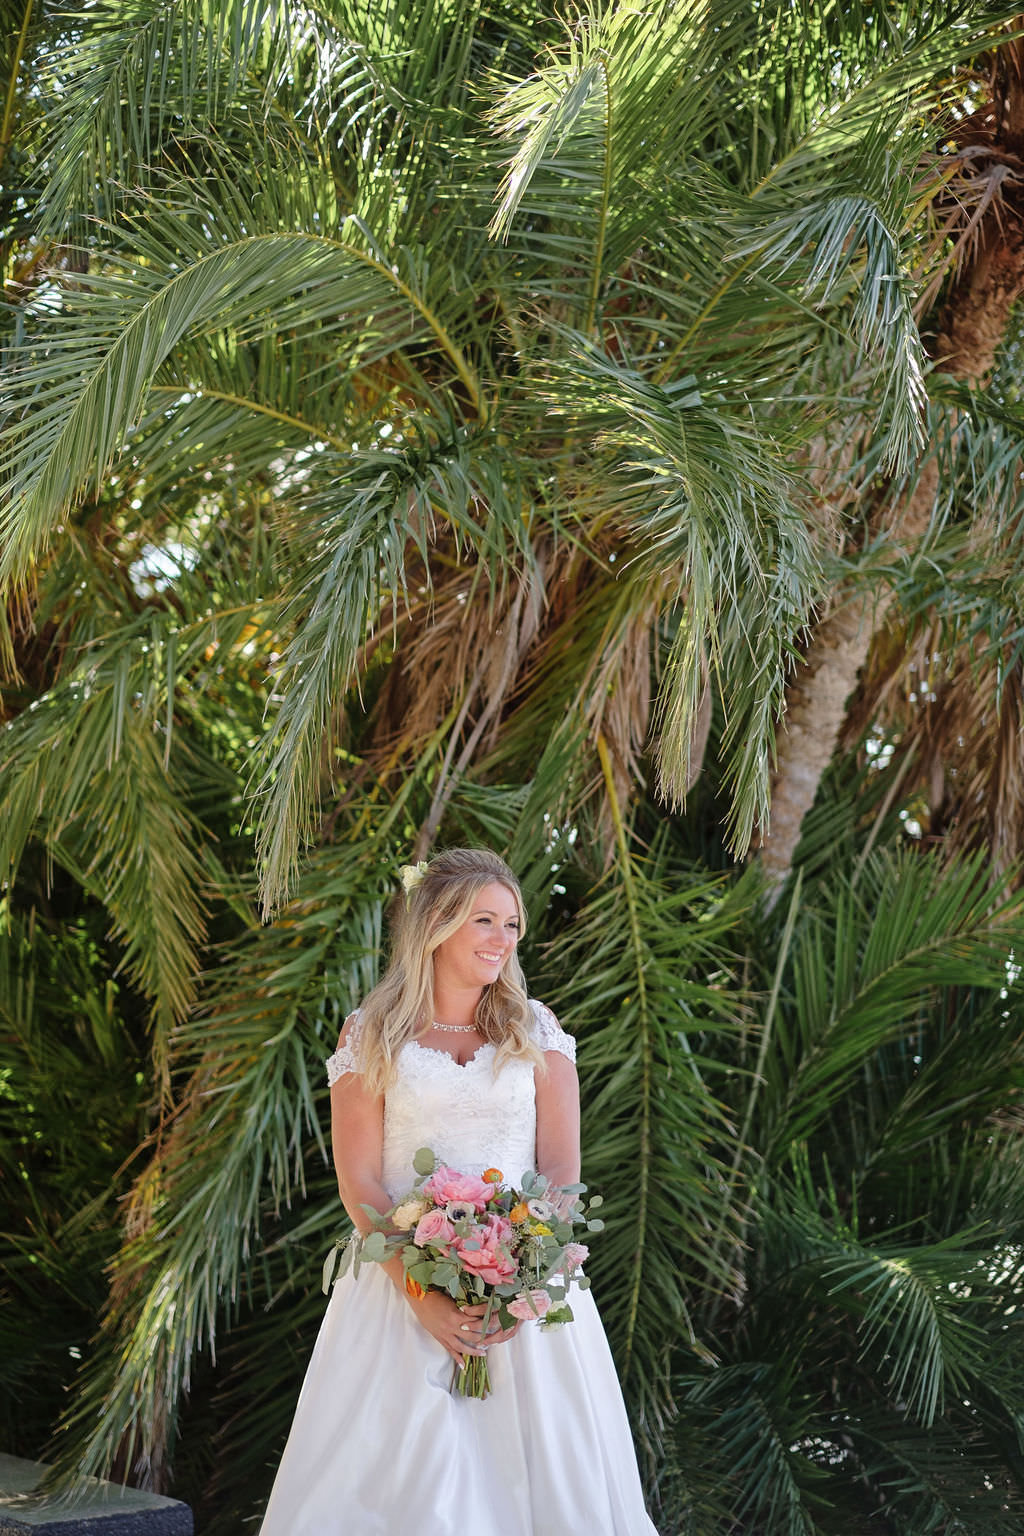 Florida Bride Outdoor Wedding Portrait, Bride in White Satin and Lace Sweetheart Neckline, Cap Sleeve Ballgown Wedding Dress with Bright Pink, Yellow, Ivory and Greenery Floral Bouquet | Tampa Bay Photographer Marc Edwards Photographs